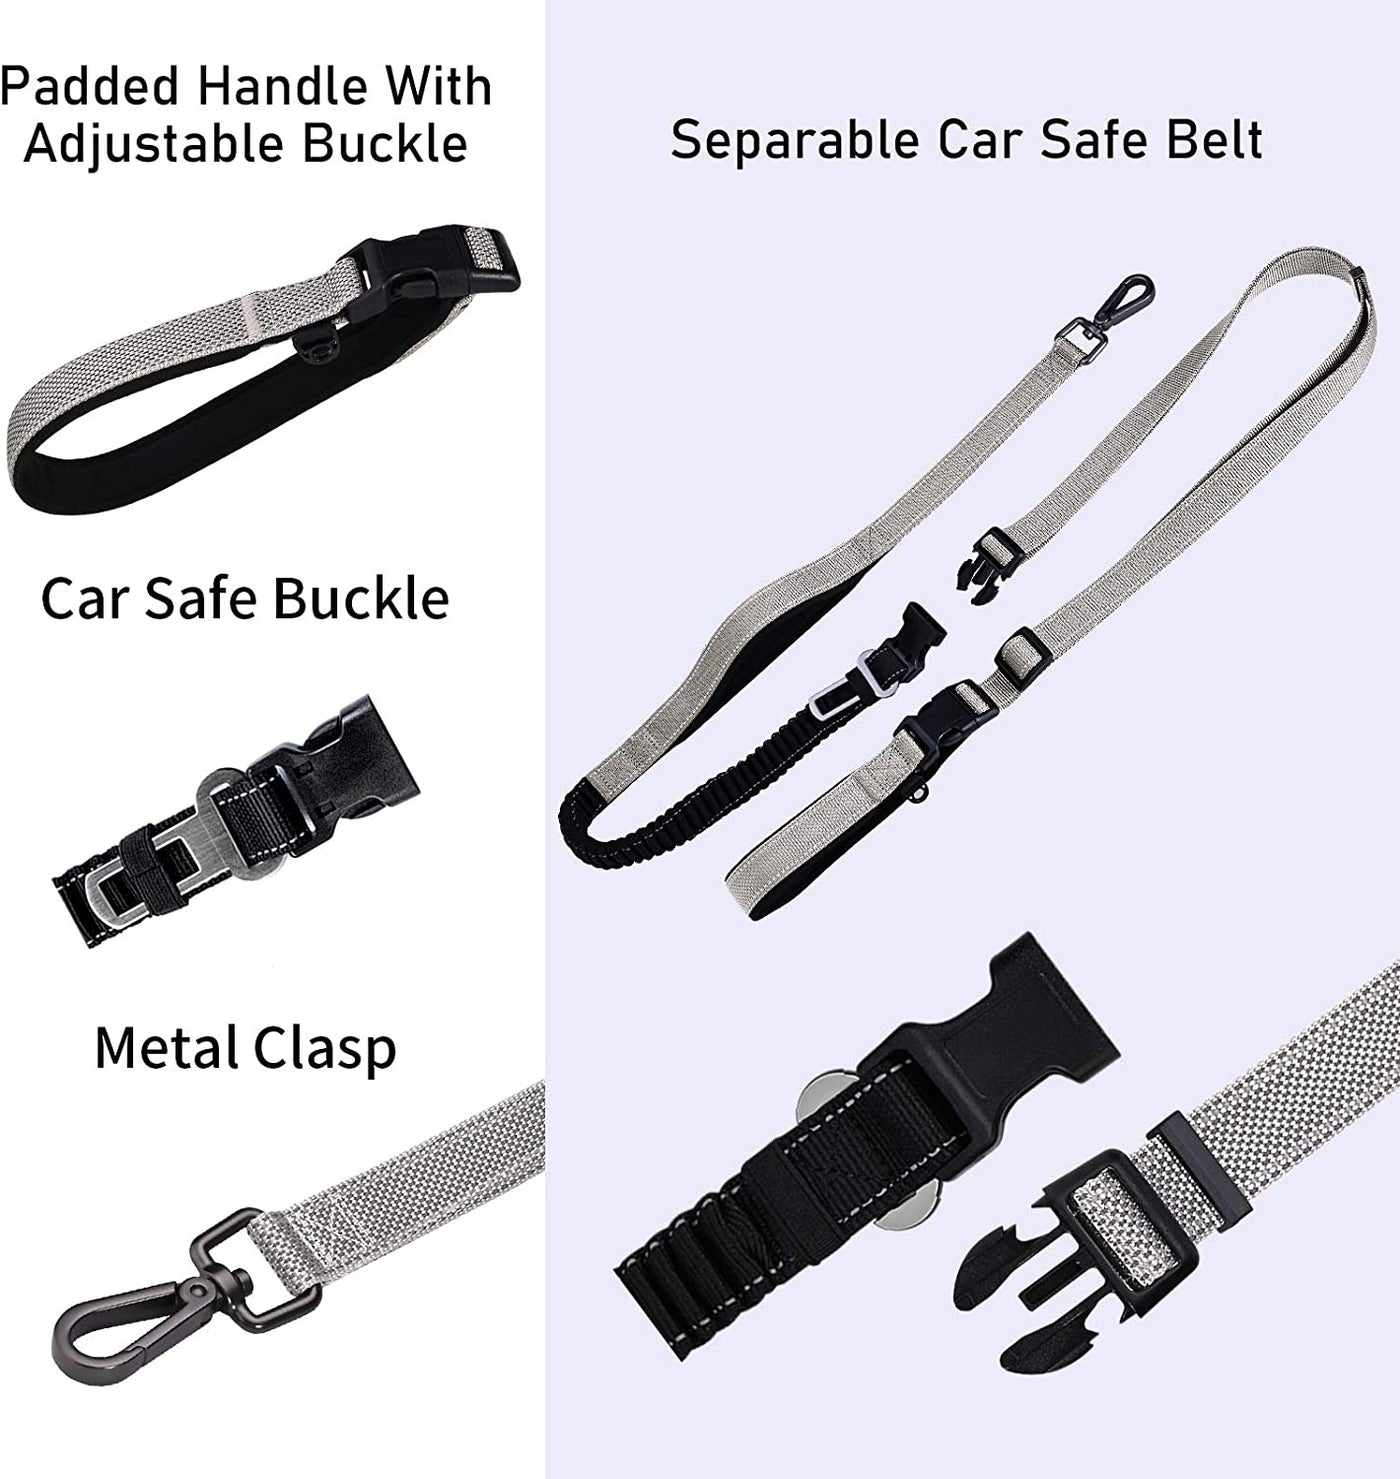  Heavy Duty Hands Free Dog Leash for Training, Hiking, Running or Jogging with Durable Bungee 